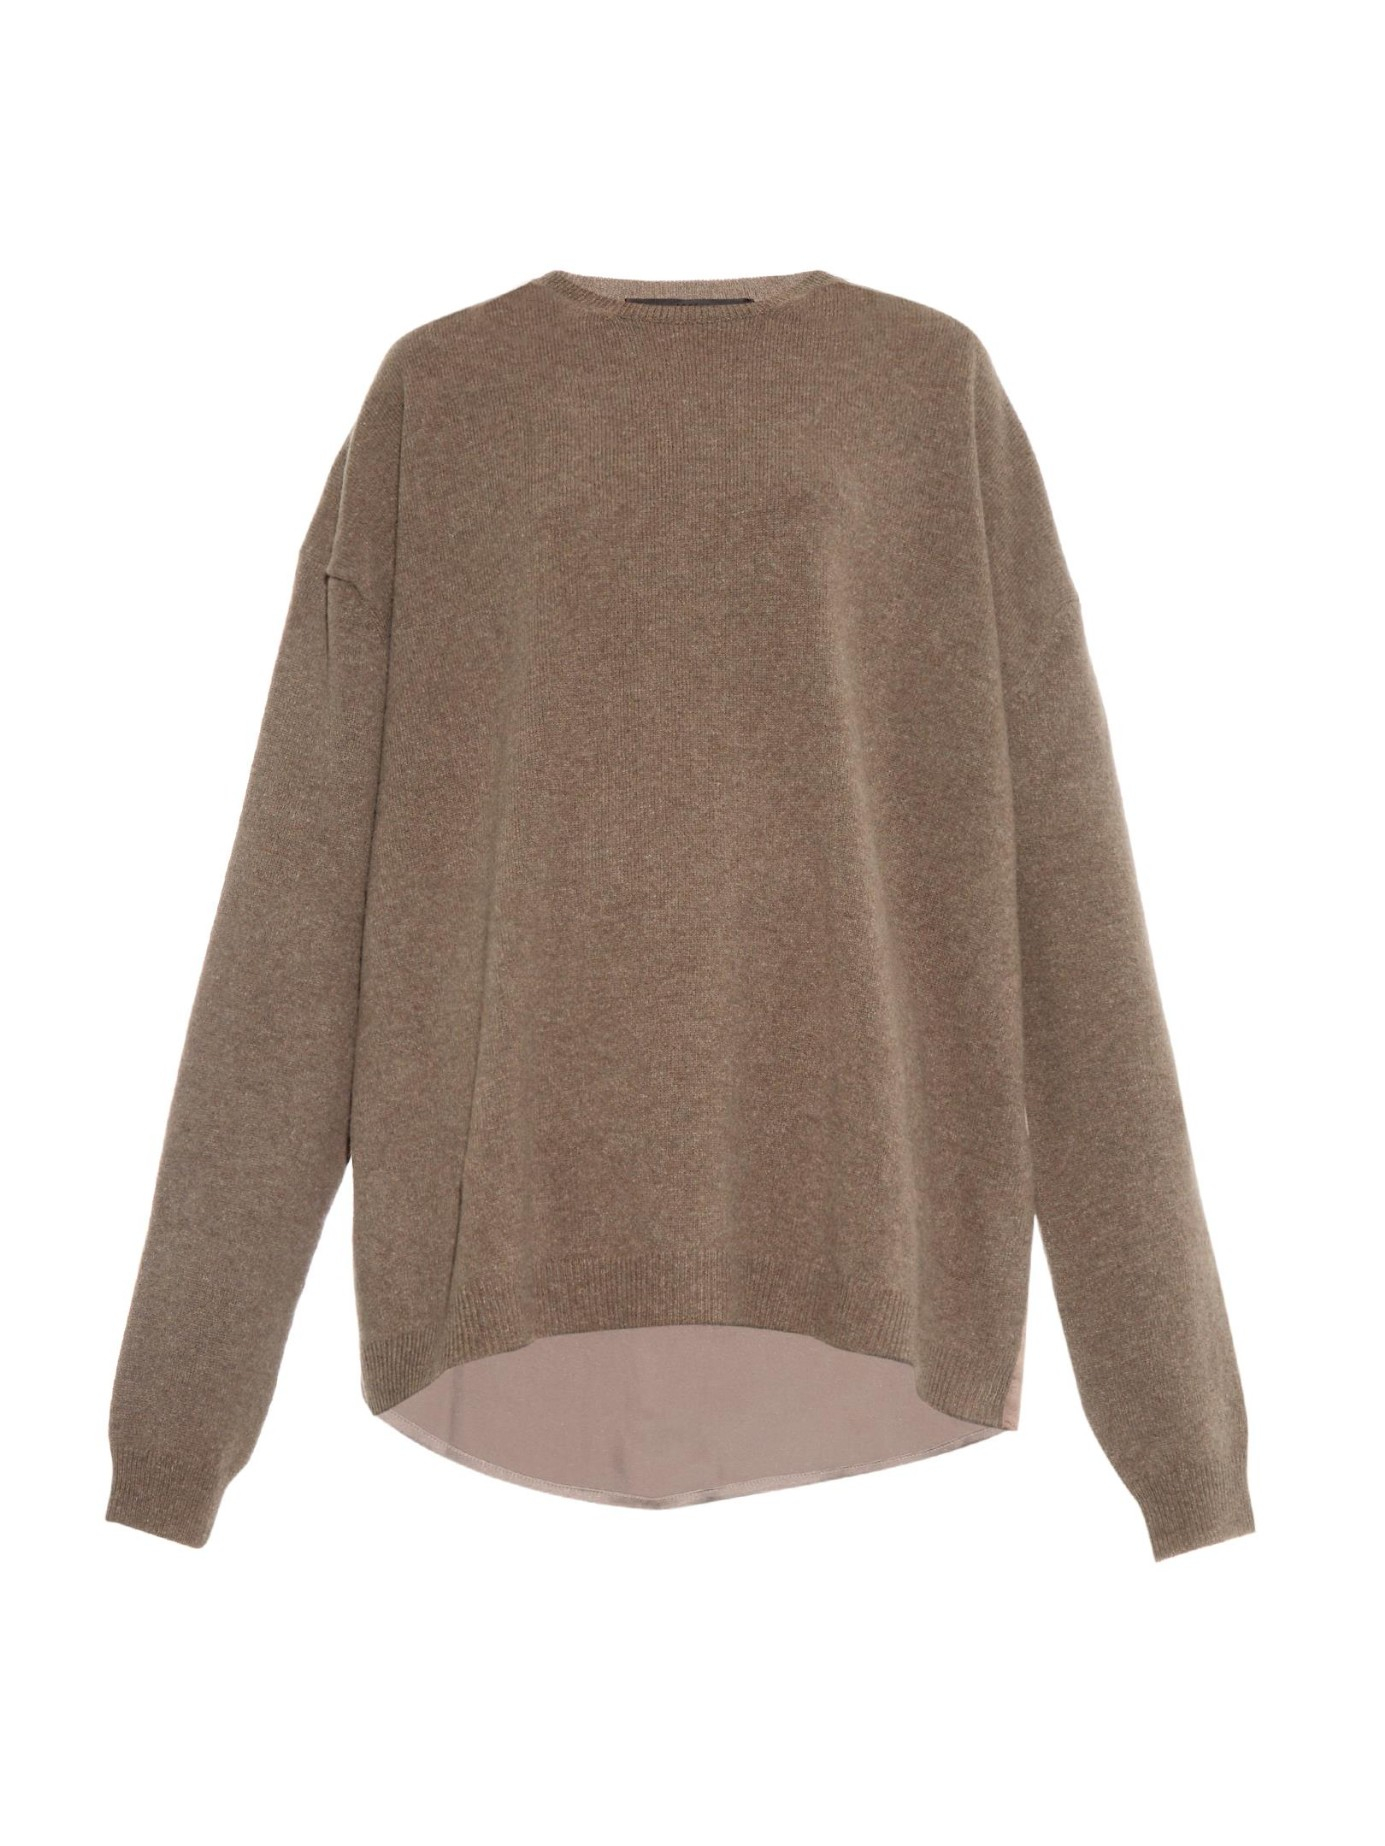 Haider ackermann Fine-knit Wool And Cashmere-blend Sweater in ...